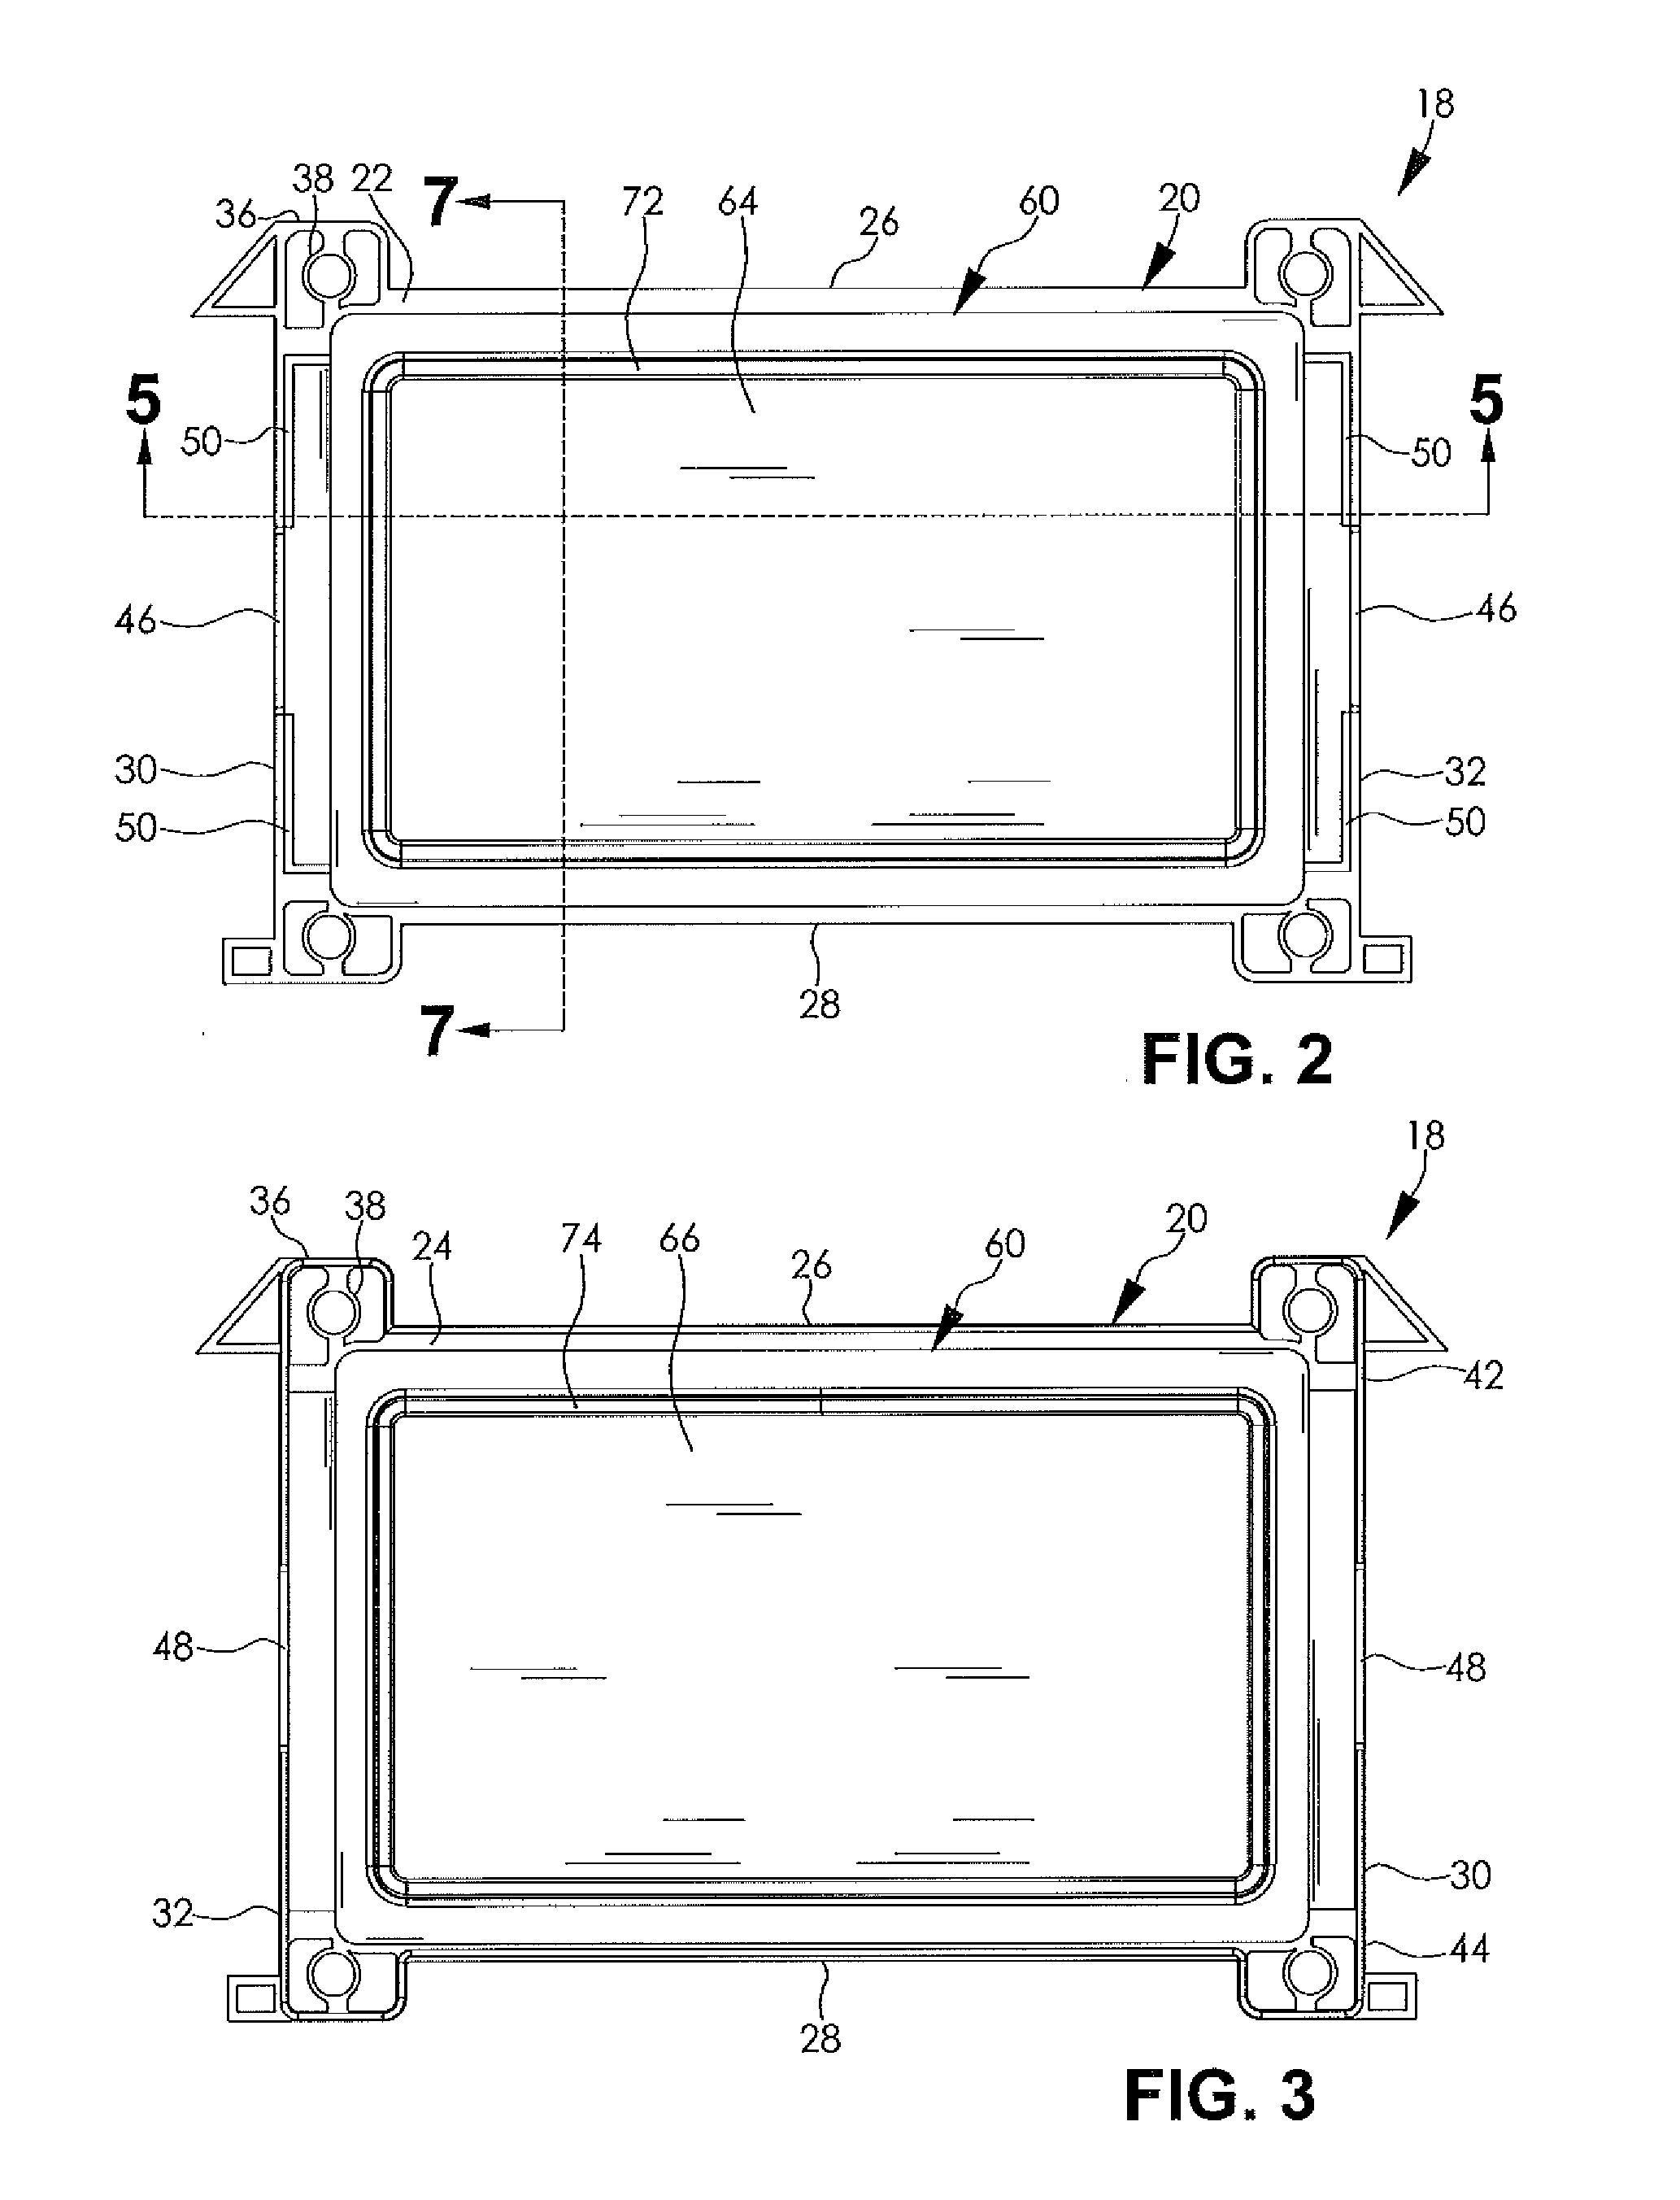 Corrugated fin and frame assembly for battery cooling